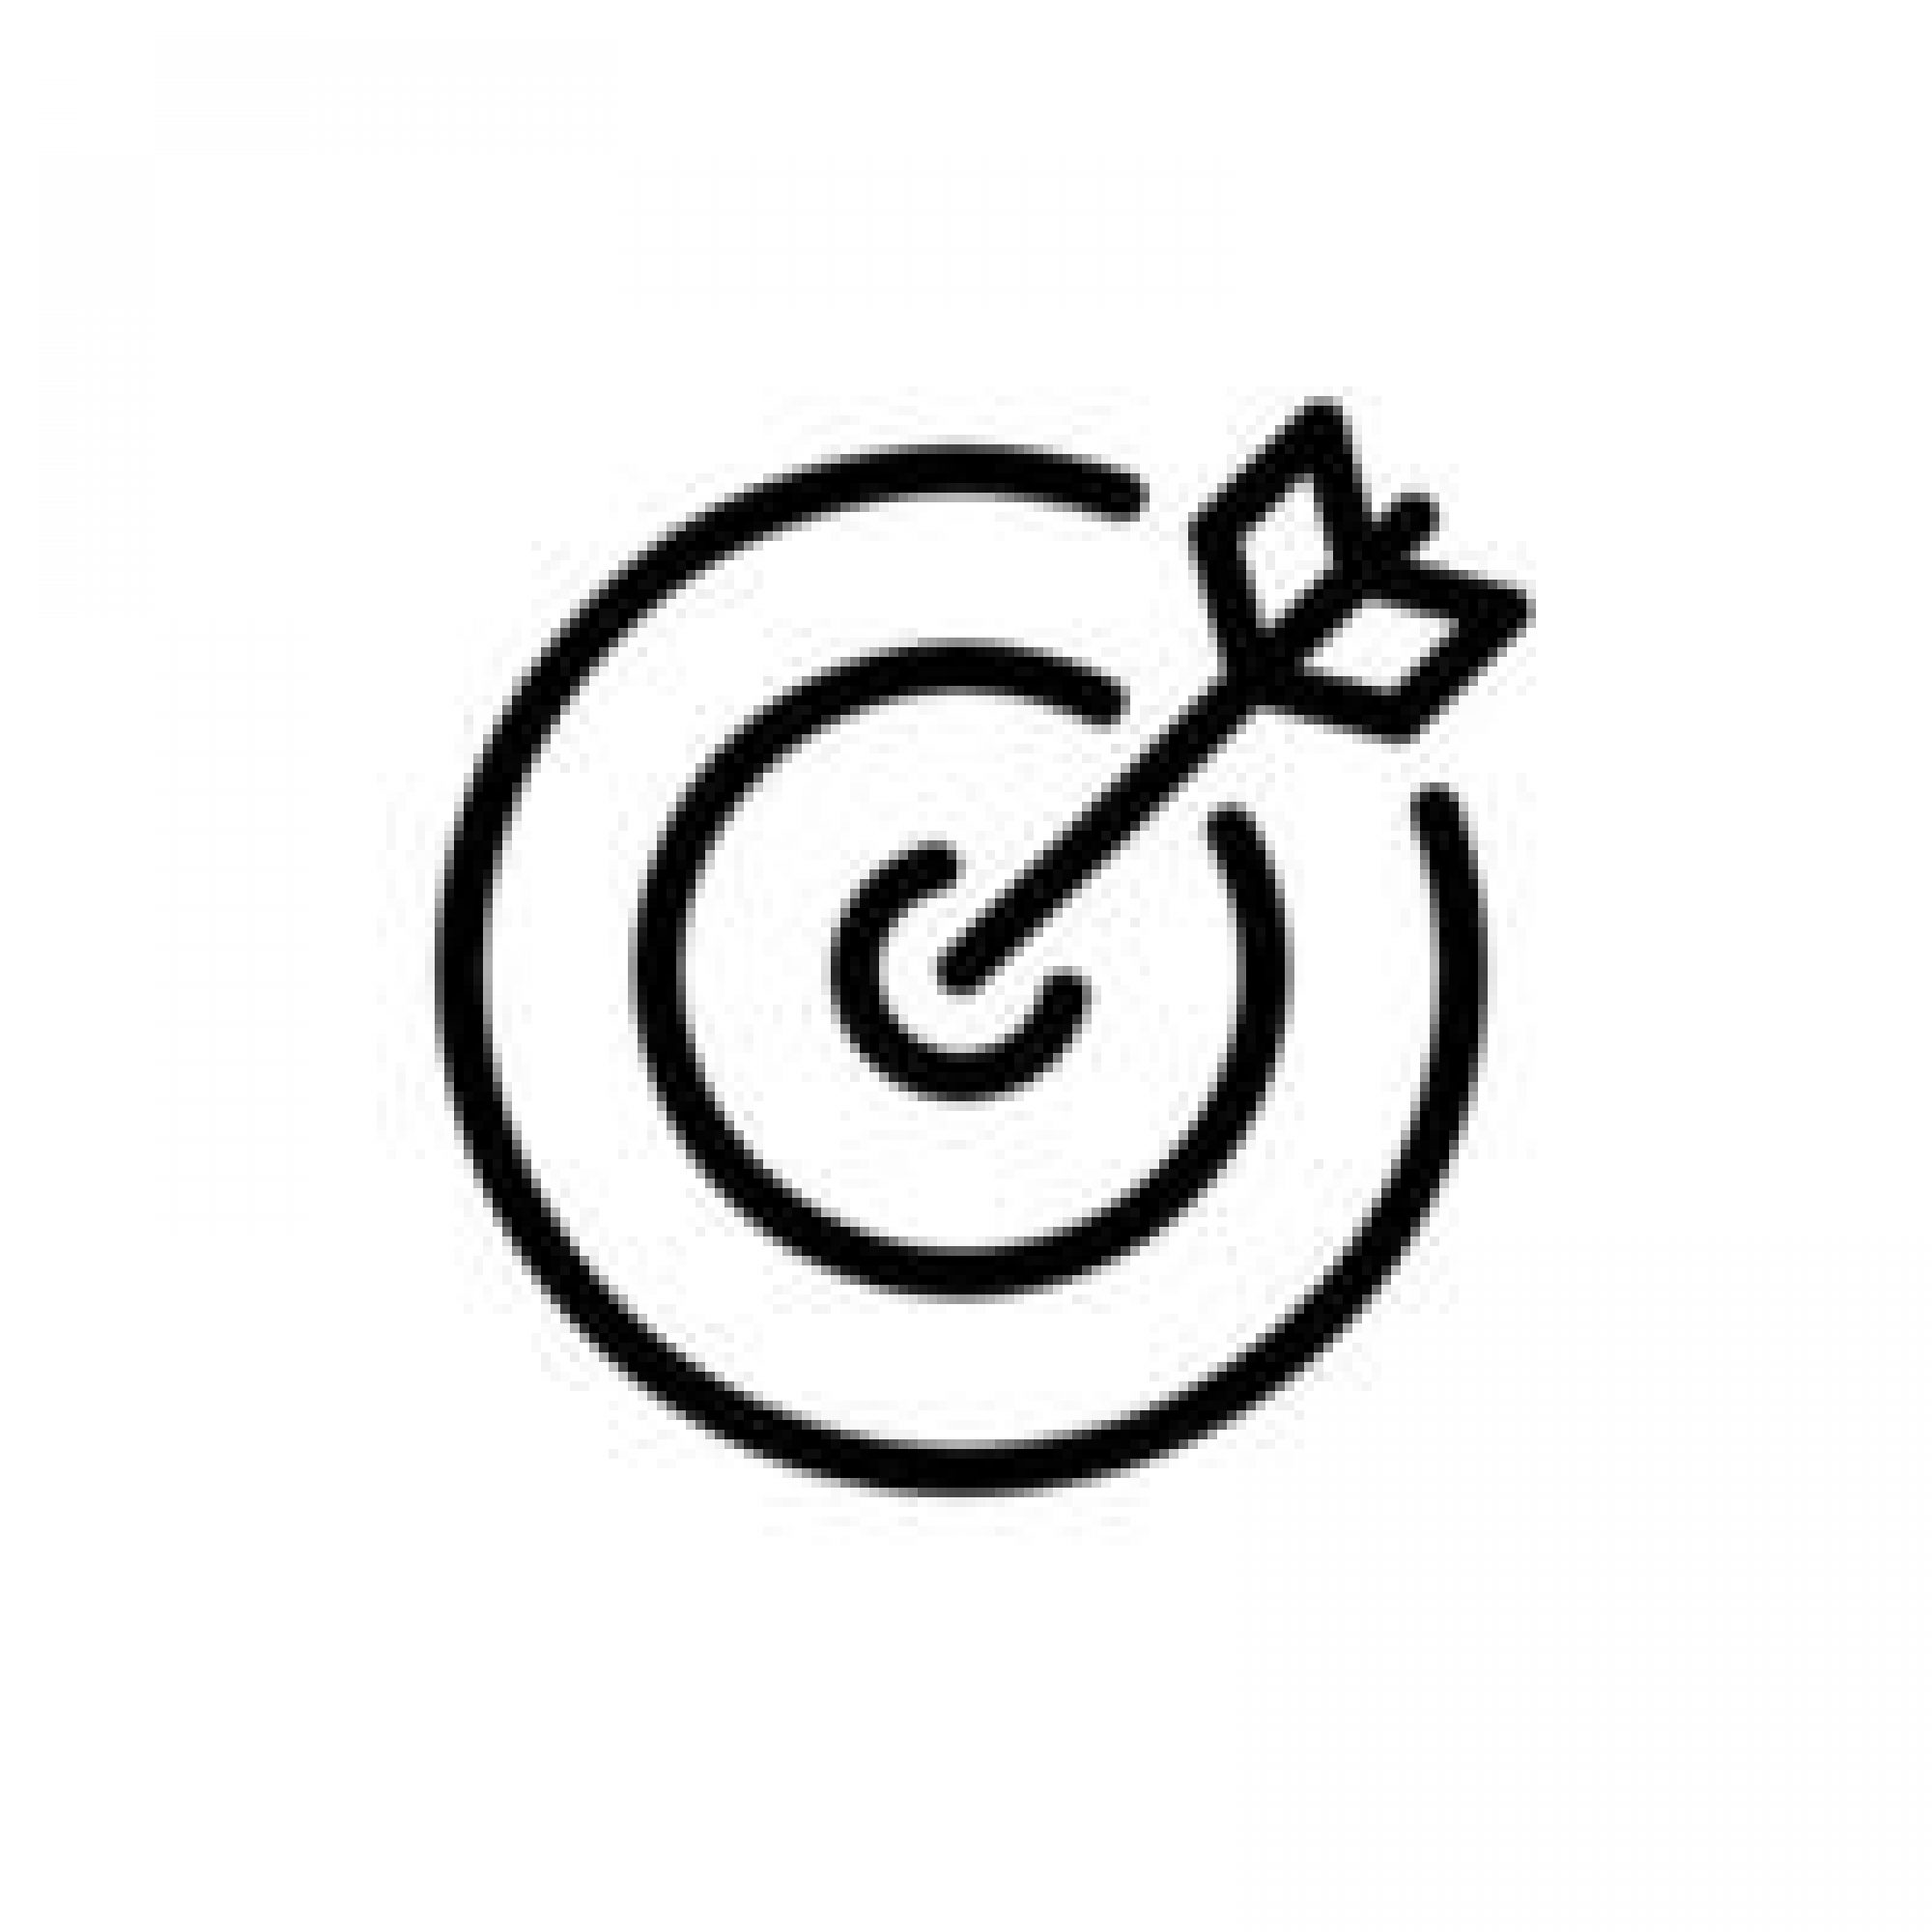 target-line-icon-outline-logo-illustration-linear-pictogram-isolated-on-white-vector